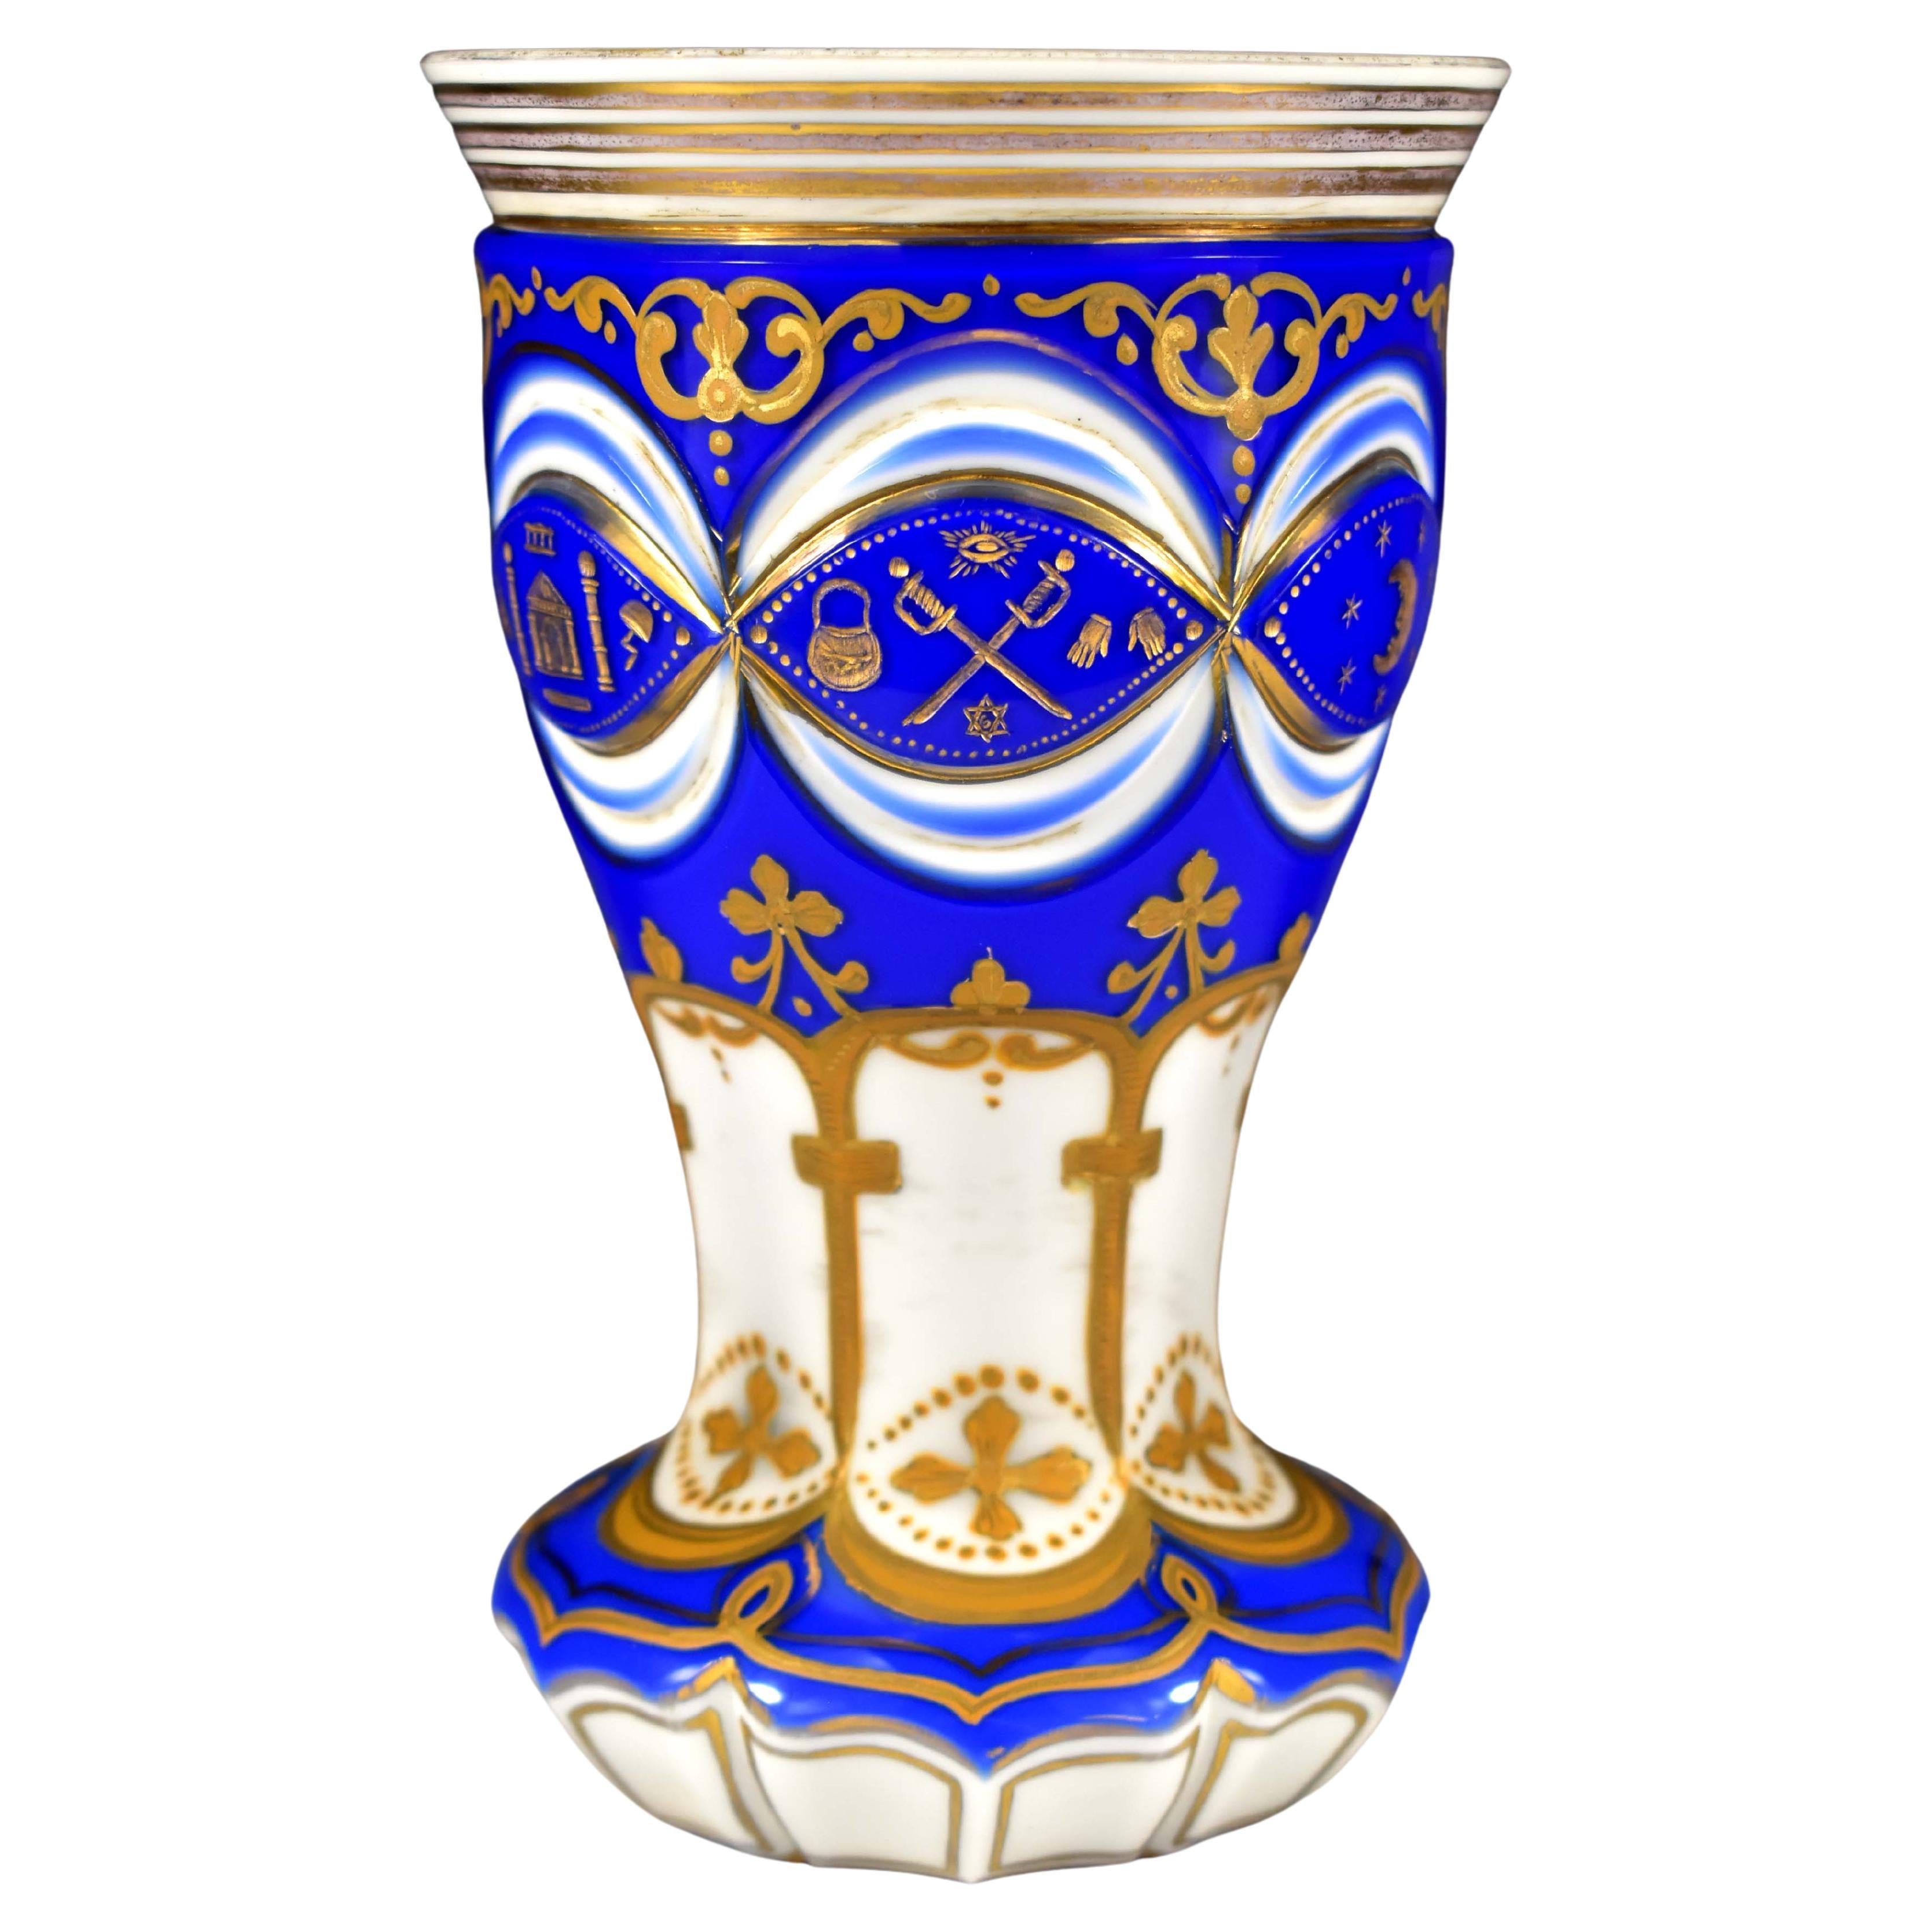 Masonic Overlay Goblet-opál and Cobalt Glass Engraved, Cut and Paint 19th Century